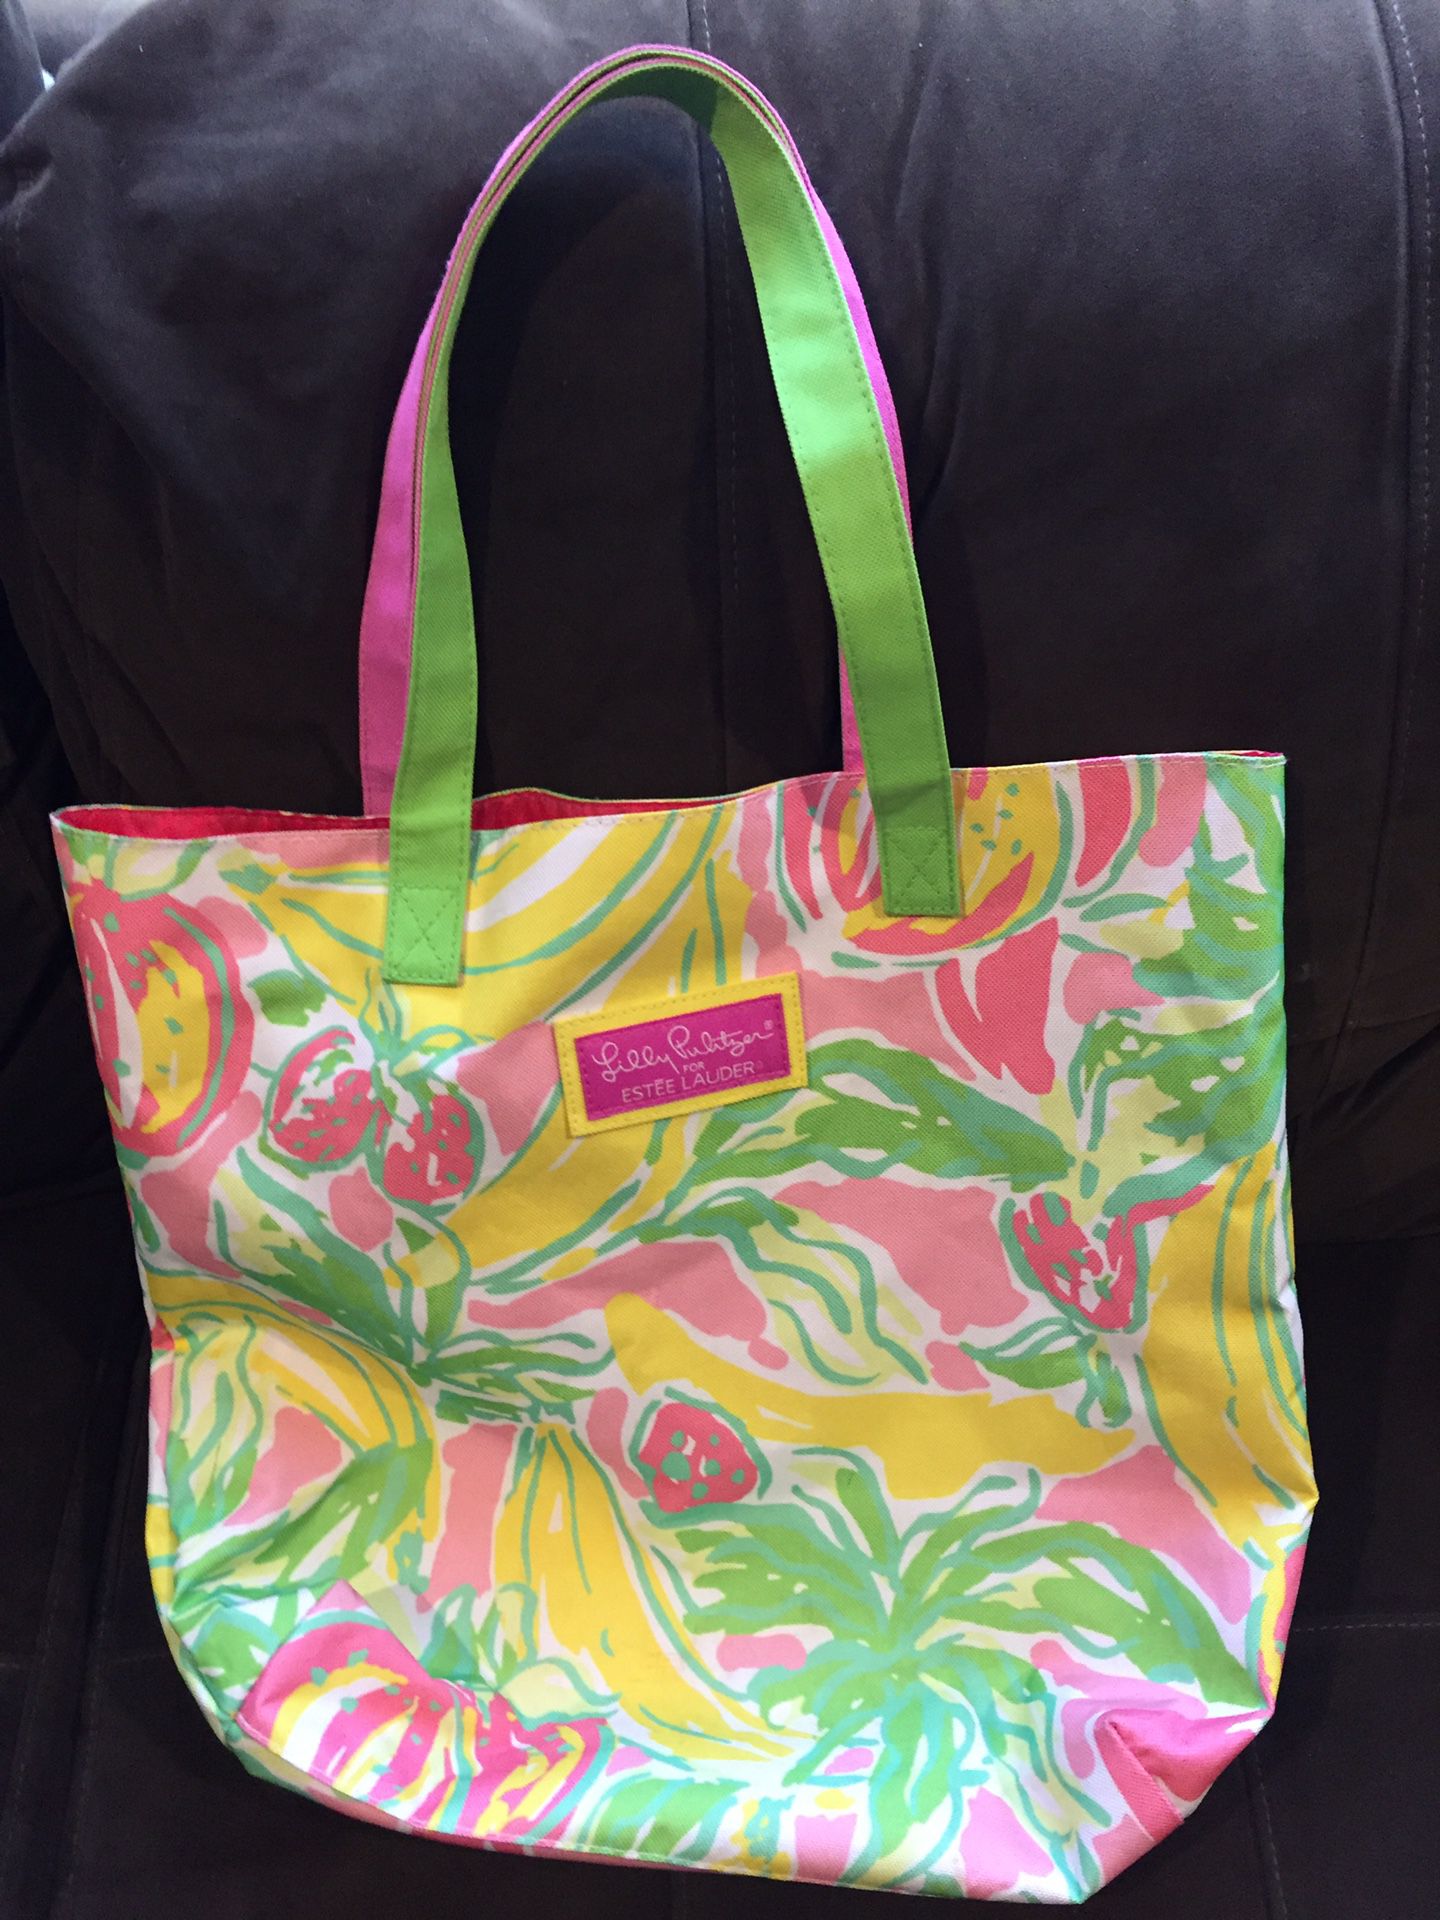 Lilly Pulitzer tote bag